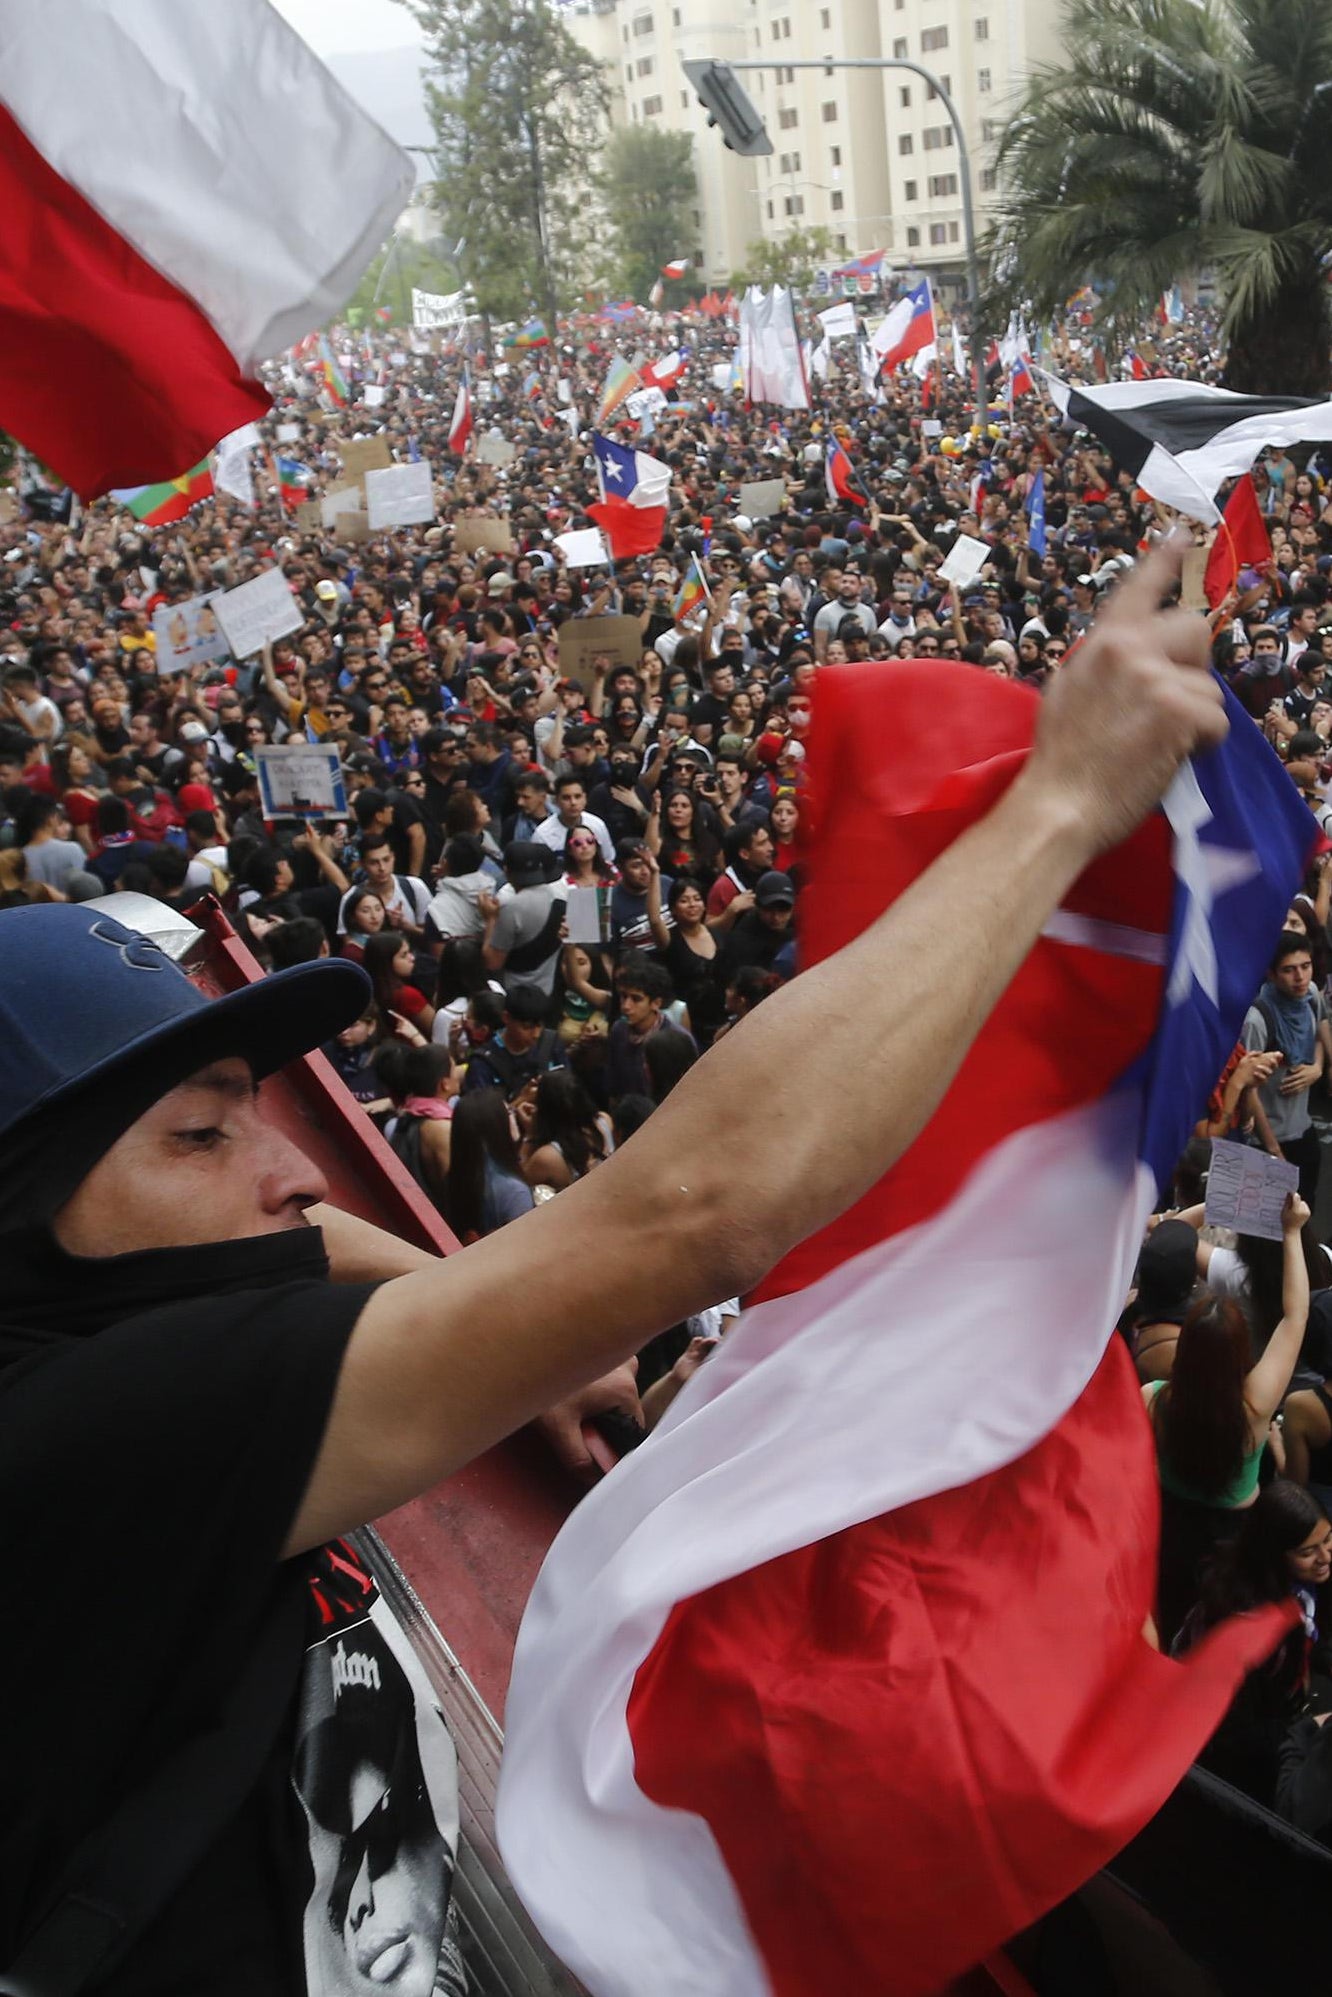 SANTIAGO, CHILE - OCTOBER 25: Chilean people protest during the eighth day of protests against President Sebastian Piñera's government on October 25, 2019 in Santiago, Chile. President Sebastian Piñera announced measures to improve social inequality, however unions called for a nationwide strike and massive demonstrations continue as death toll reached 18. Demands behind the protests include issues as health care, pension system, privatization of water, public transport, education, social mobility and corruption. (Photo by Marcelo Hernandez/Getty Images)